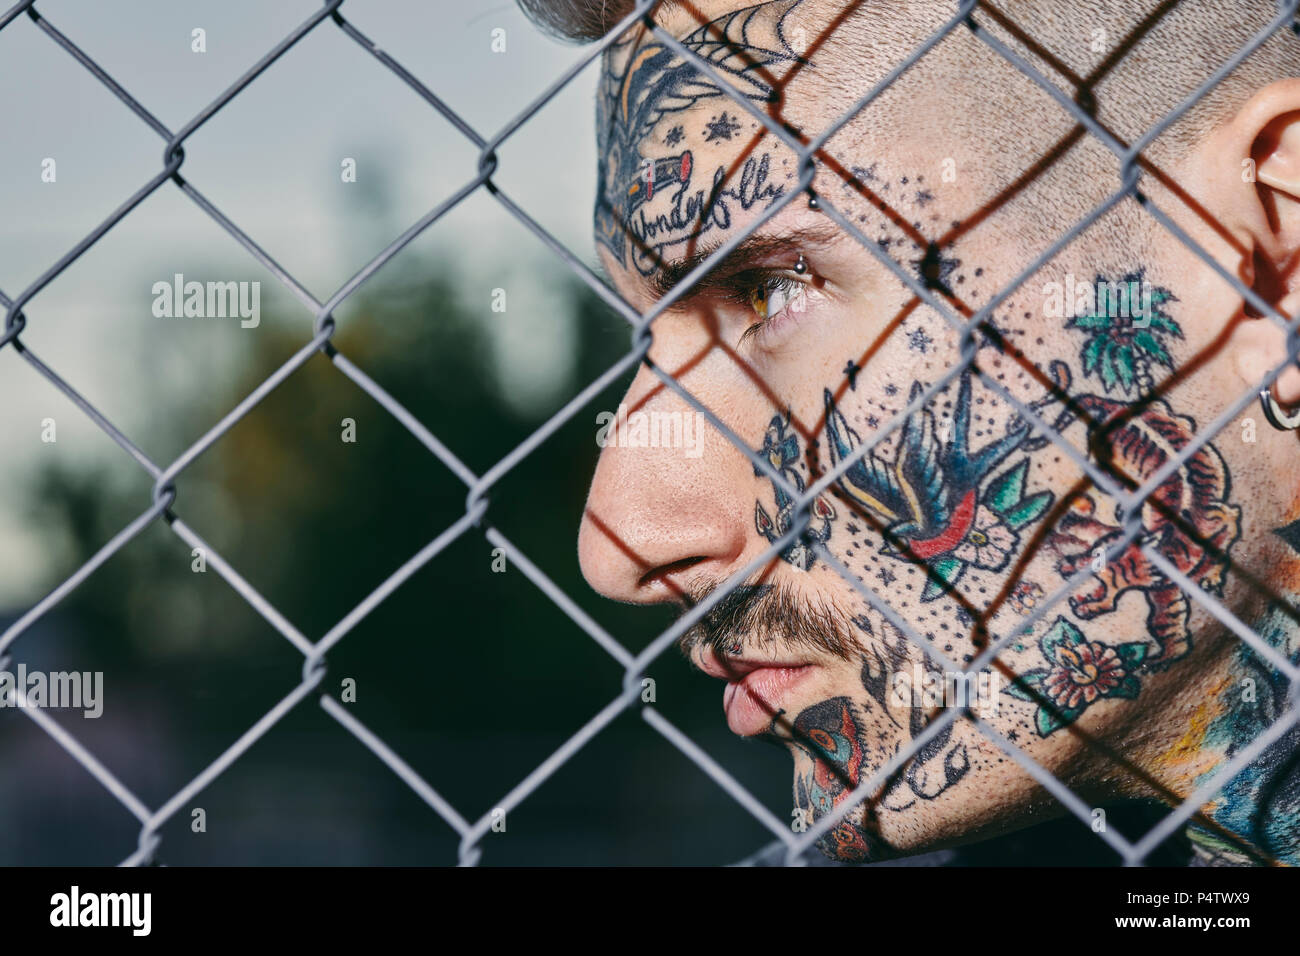 Tattooed face of young man behind fence Stock Photo